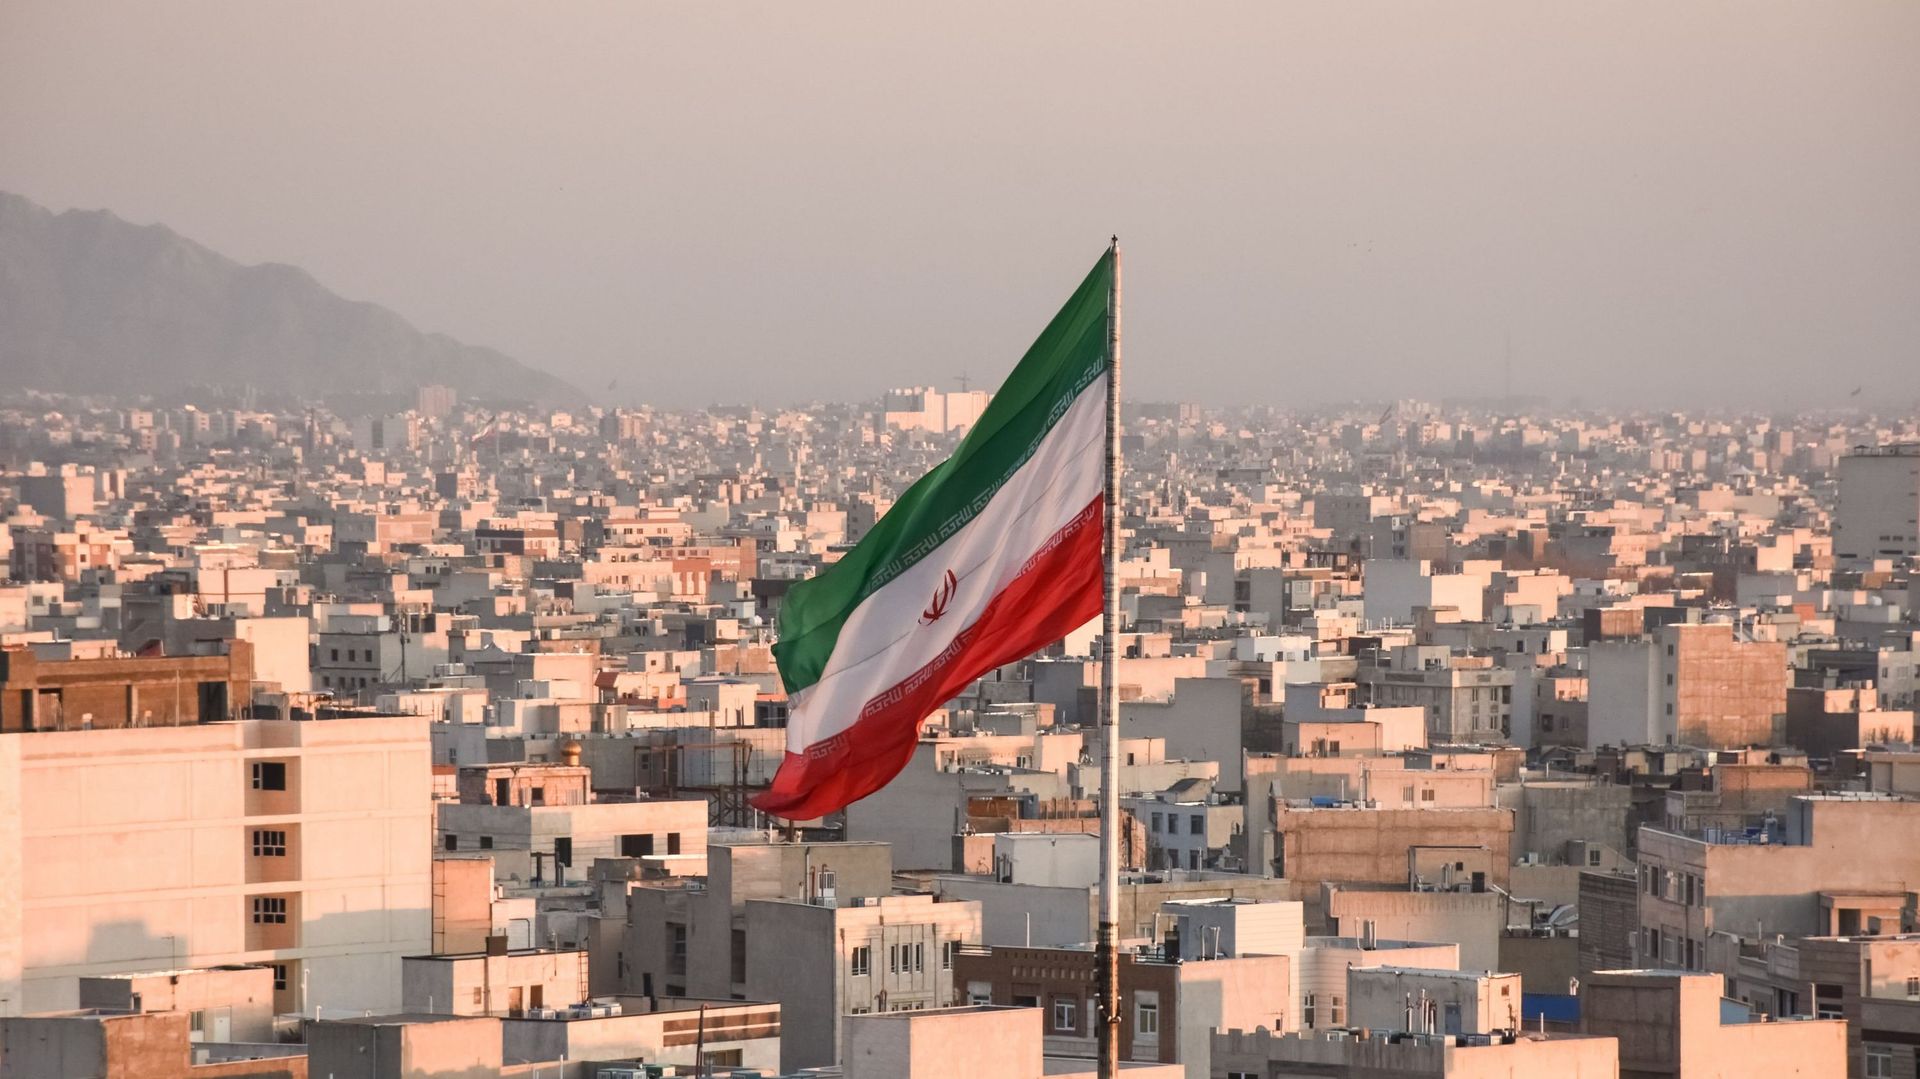 Iranian flag waving with city skyline on background in Tehran, Iran